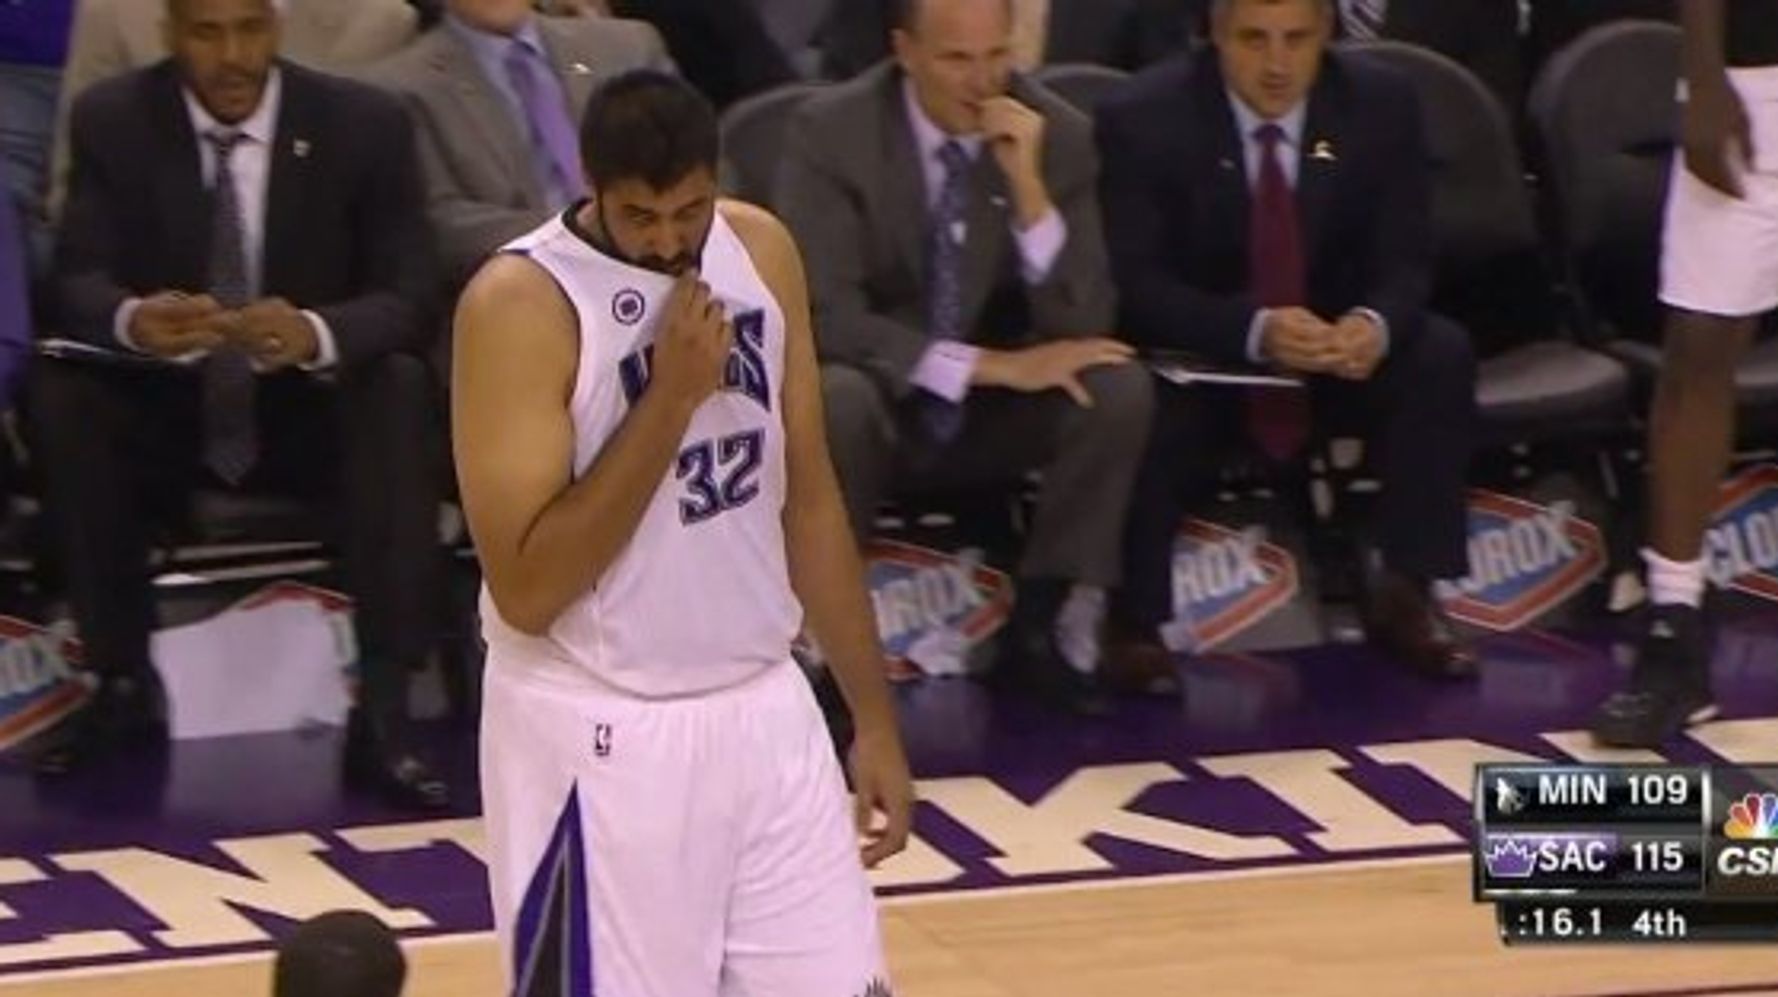 Hoopistani: Sim Bhullar - first person of Indian origin to play in the NBA  - has signed with Taiwanese team Dacin Tigers